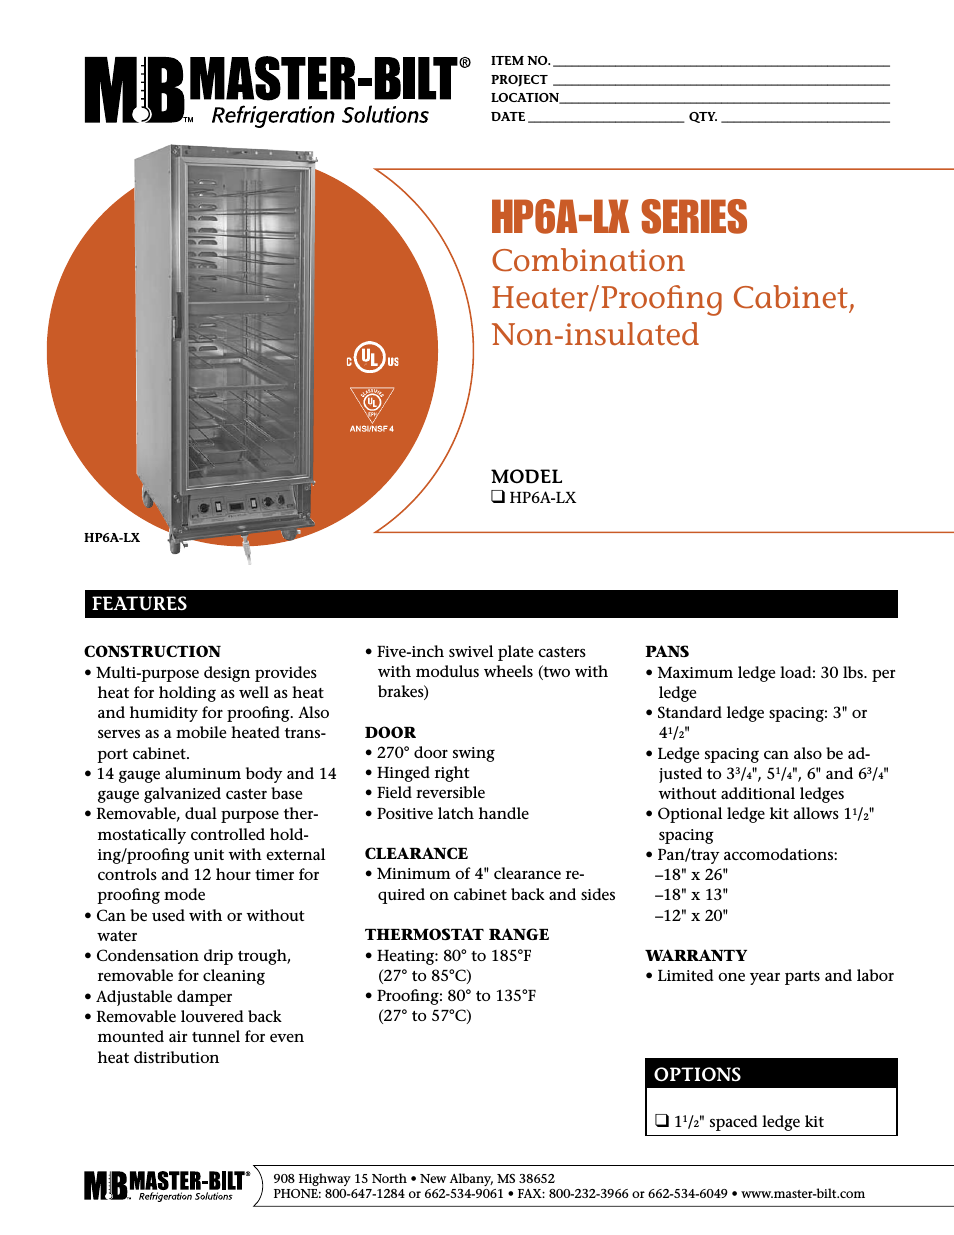 Combination Heater/Proofing Cabinet Non-insulated HP6A-LX Series